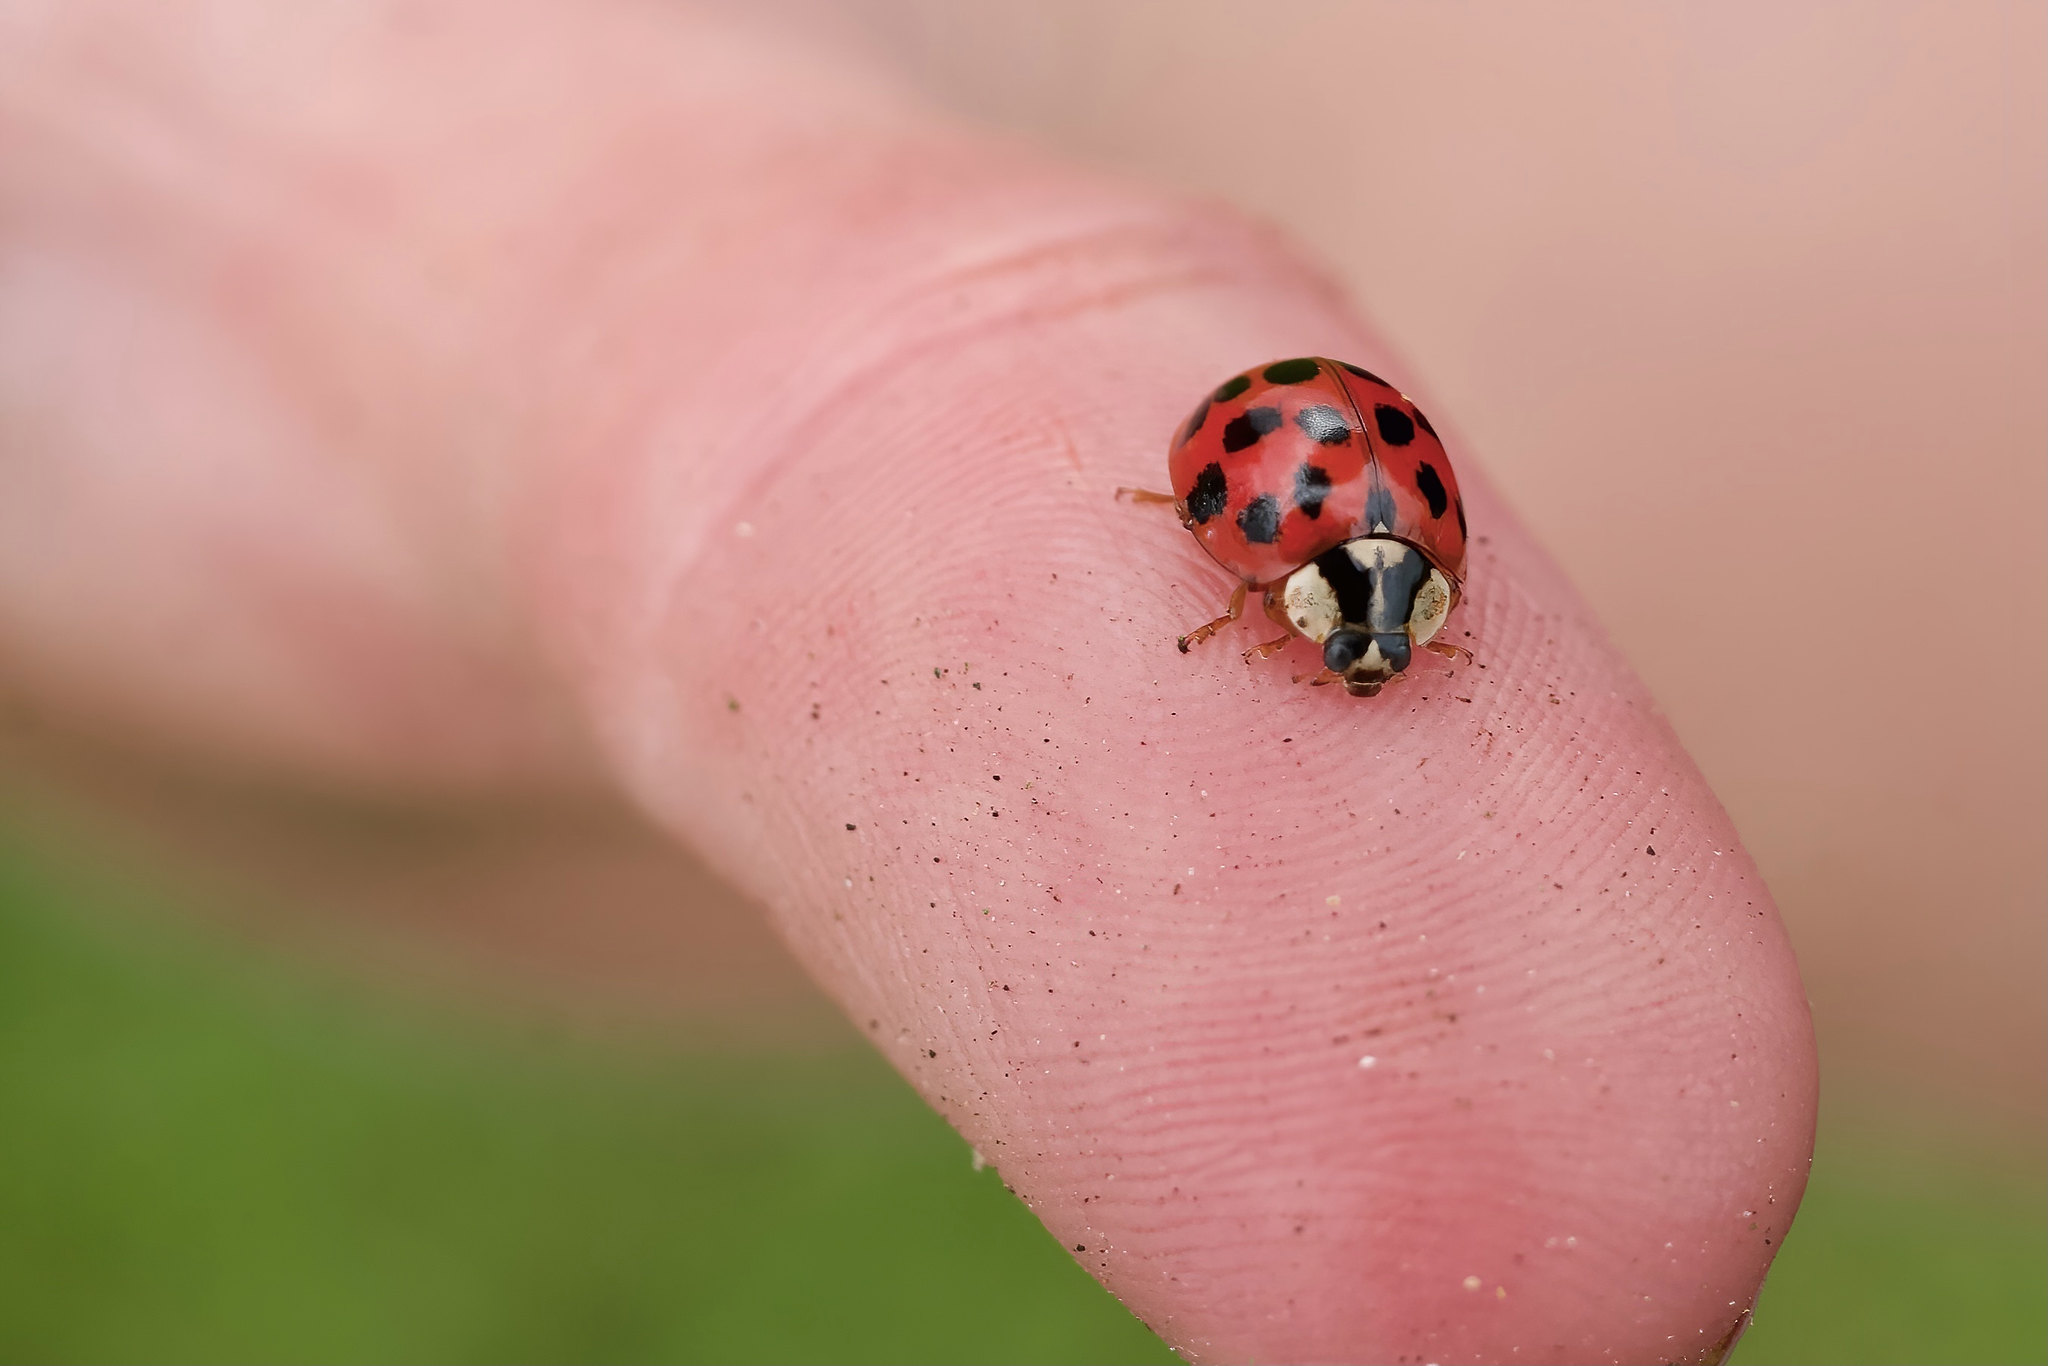 Lady beetle (Coccinellidae) – Rechtmehring, Upper Bavaria, Germany